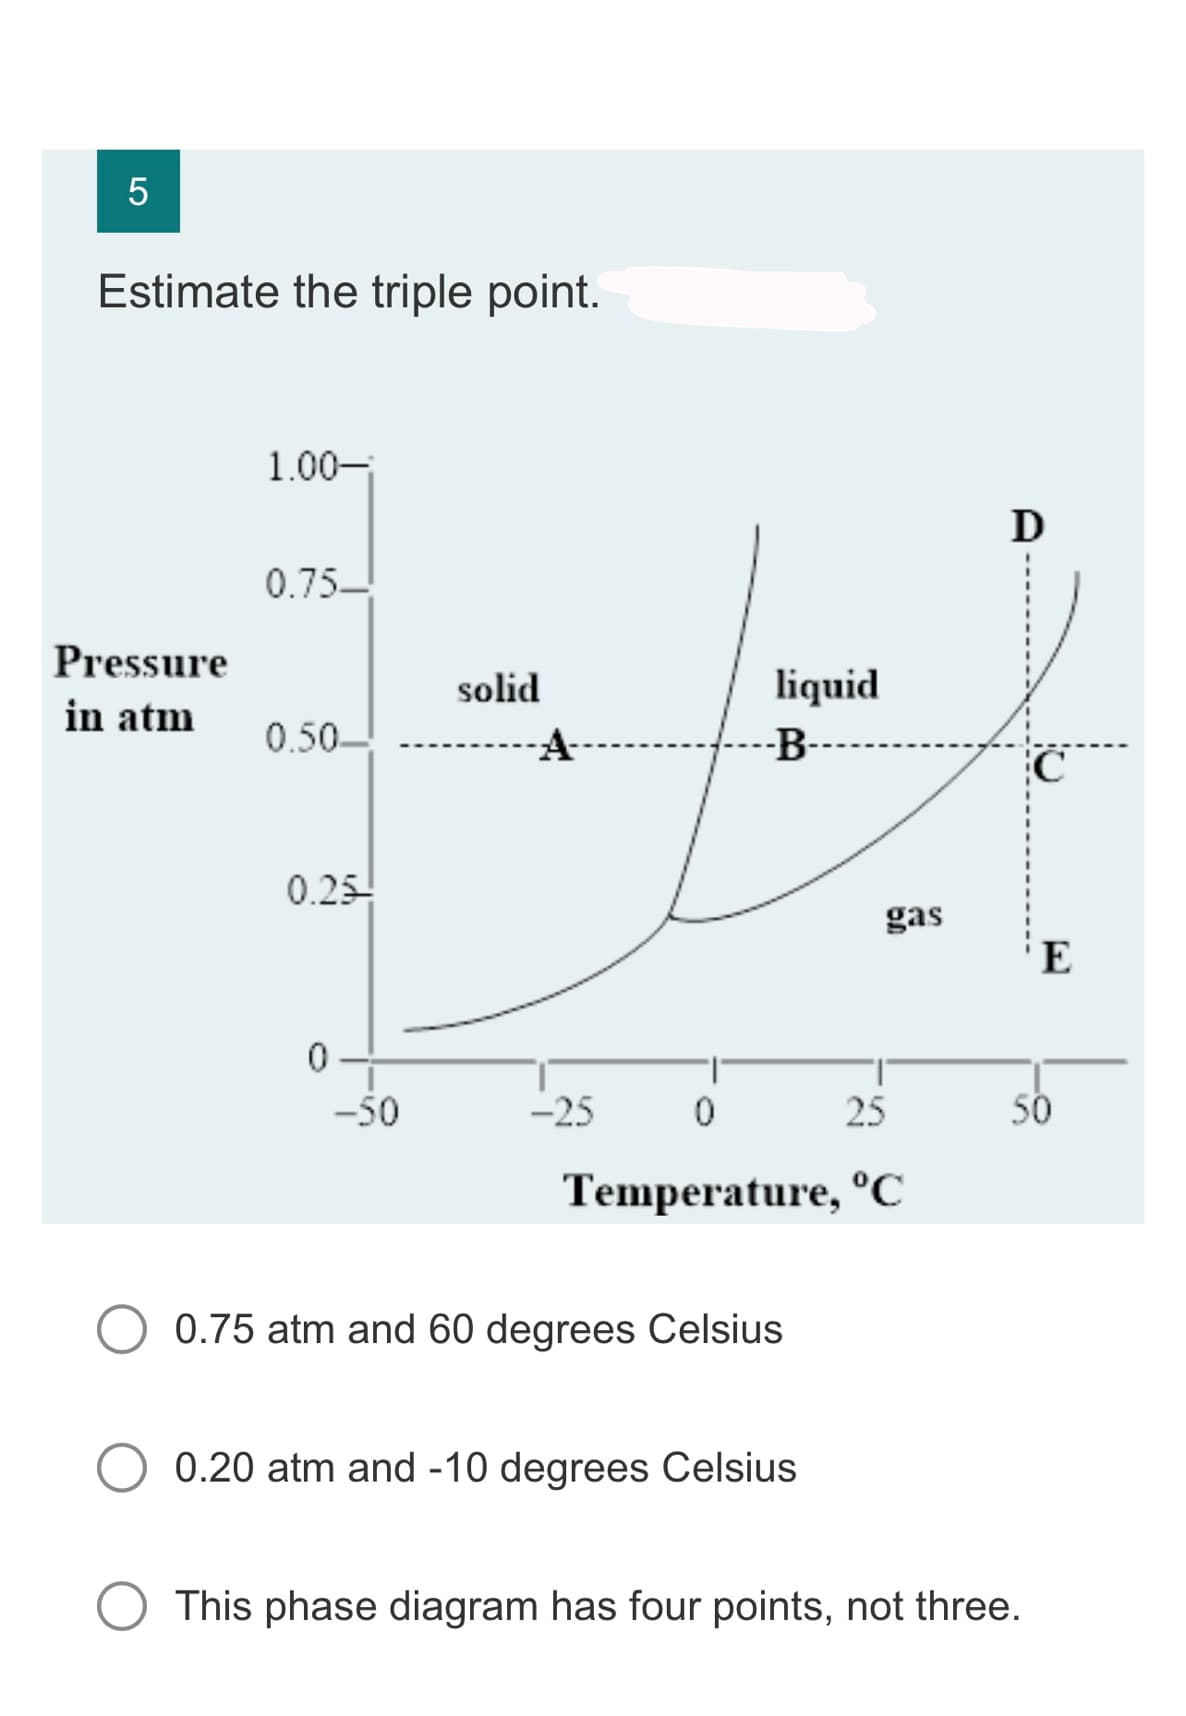 LO
5
Estimate the triple point.
Pressure
in atm
1.00-
0.75-
0.50-
0.25
0
-50
solid
-25
liquid
--B----
0
25
Temperature, °C
0.75 atm and 60 degrees Celsius
gas
0.20 atm and -10 degrees Celsius
D
C
This phase diagram has four points, not three.
E
50